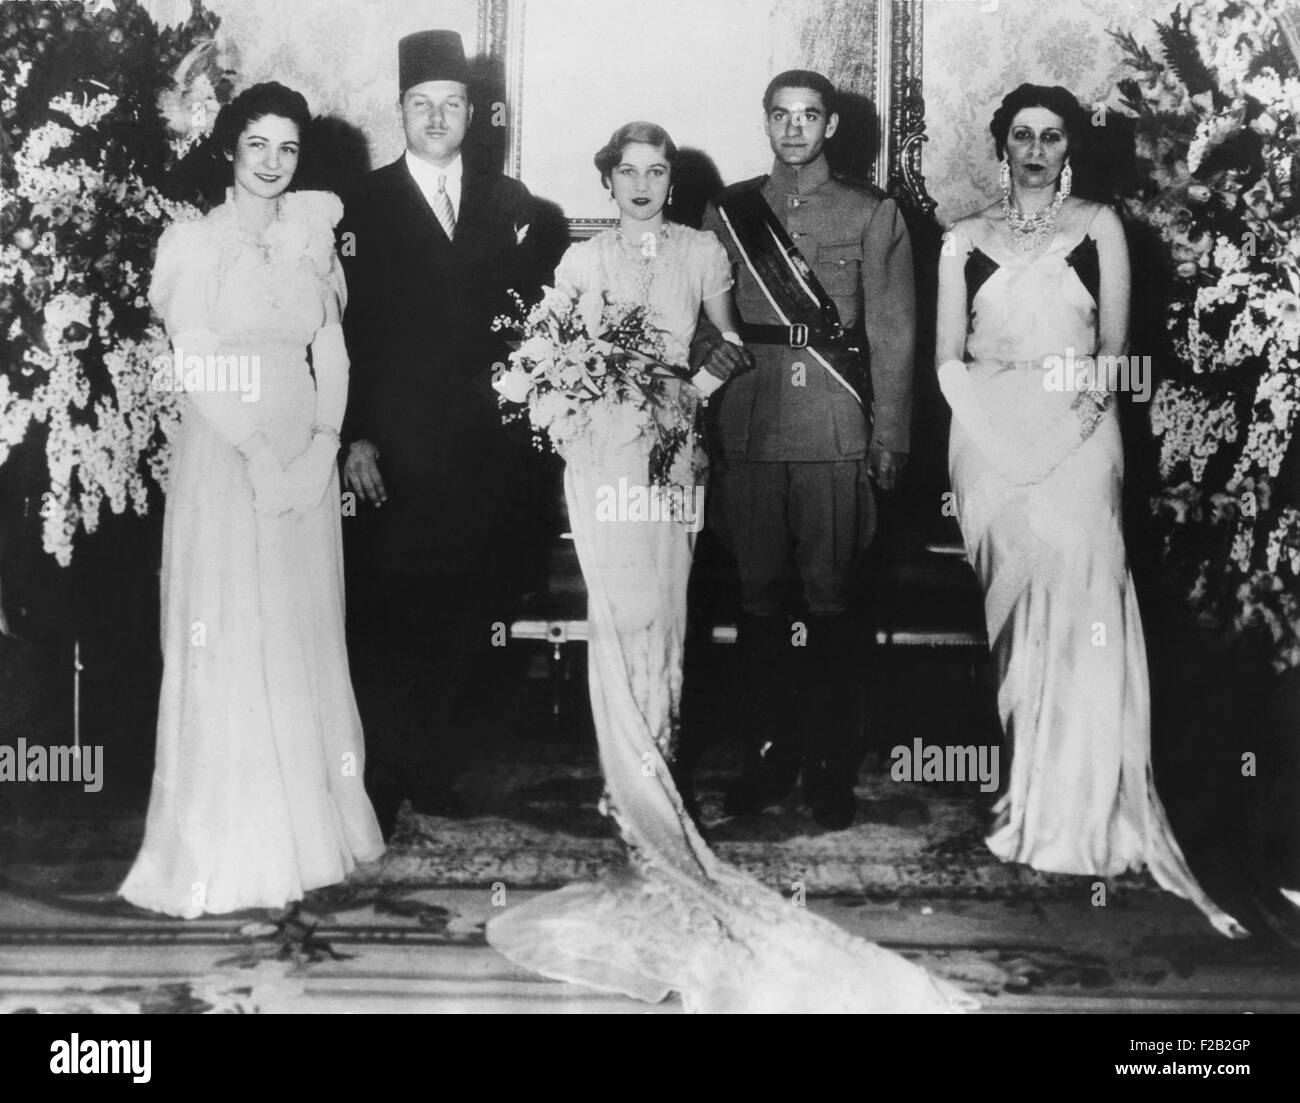 Iran's Crown Prince Reza marries Egyptian Princess Fawzia, March 30, 1939. The wedding group in Cairo's Abdin Palace, L-R: Queen Farida and King Farouk of Egypt; Princess Fawzia and Crown Prince Mohammed Reza; and Queen Mother Nazli. (CSU 2015 8 515) Stock Photo